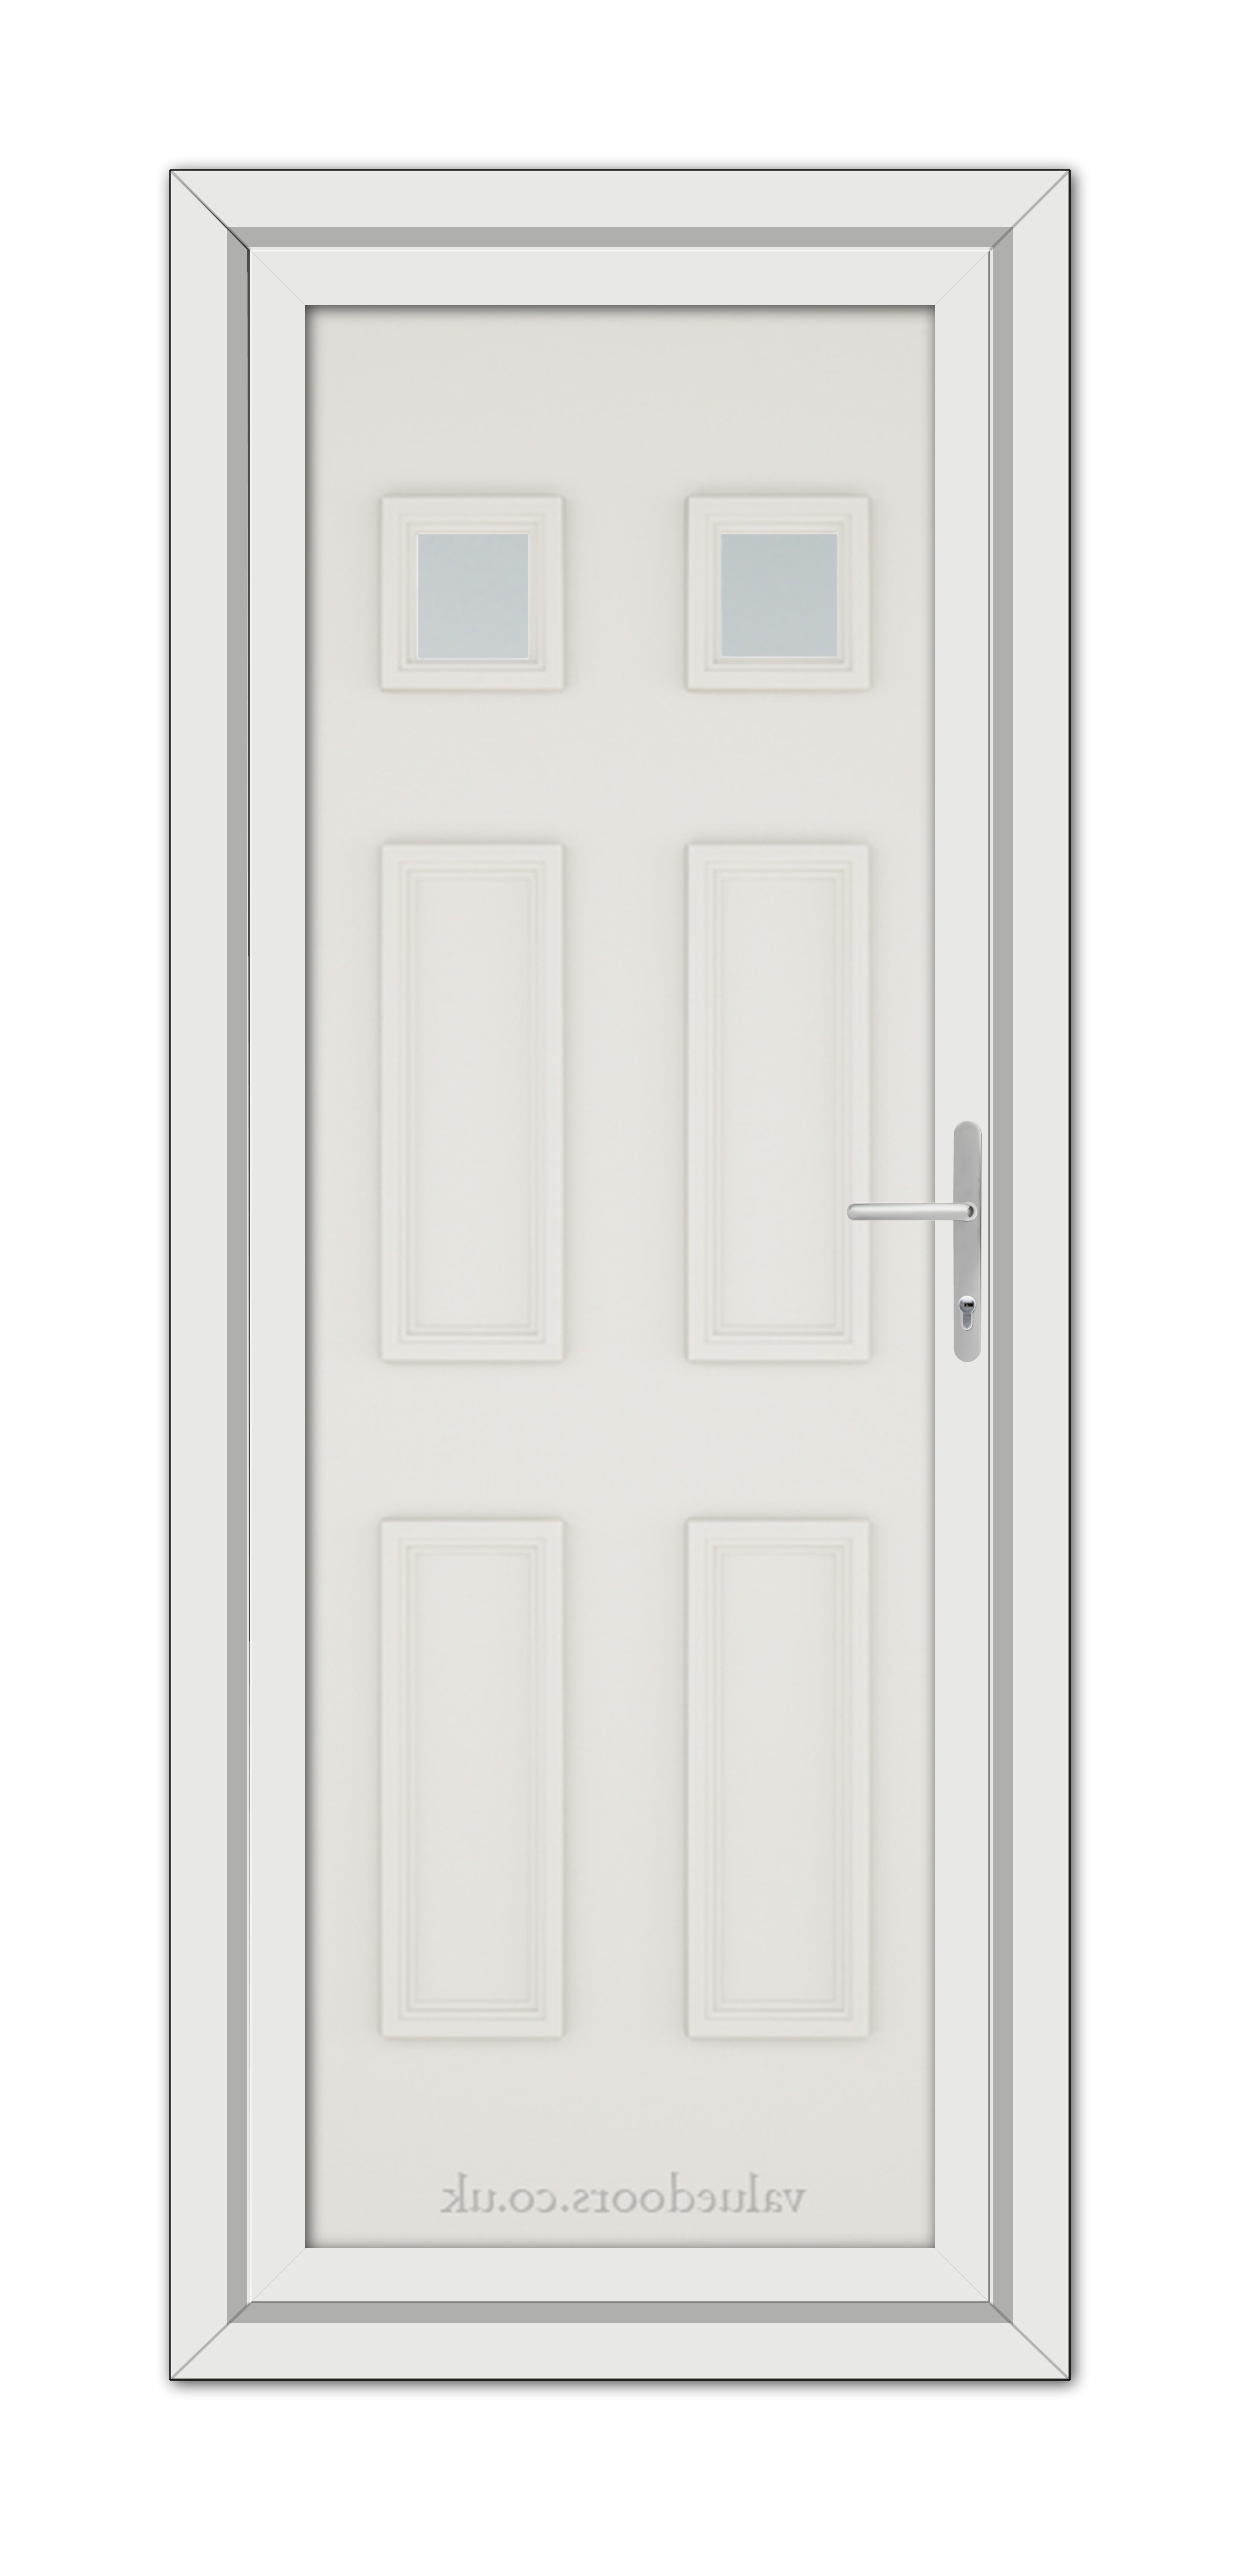 A White Cream Windsor uPVC Door with a silver handle.